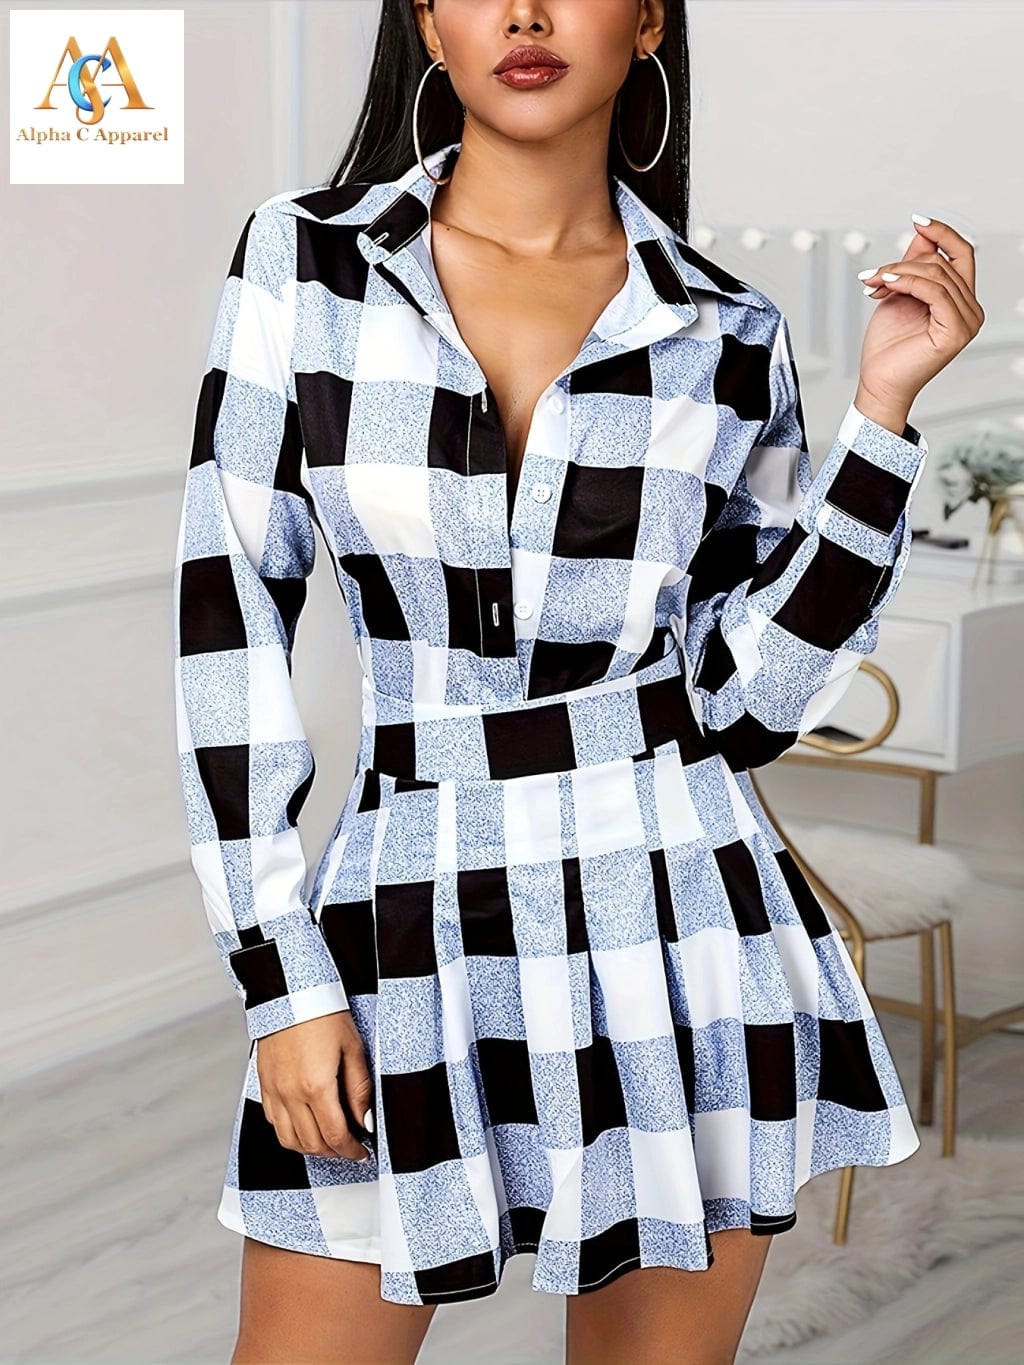 Alpha C Apparel Stylish Plaid Two-Piece Set Button Up Shirt & Pleated Skirt Outfits for Women women clothing Alpha C Apparel